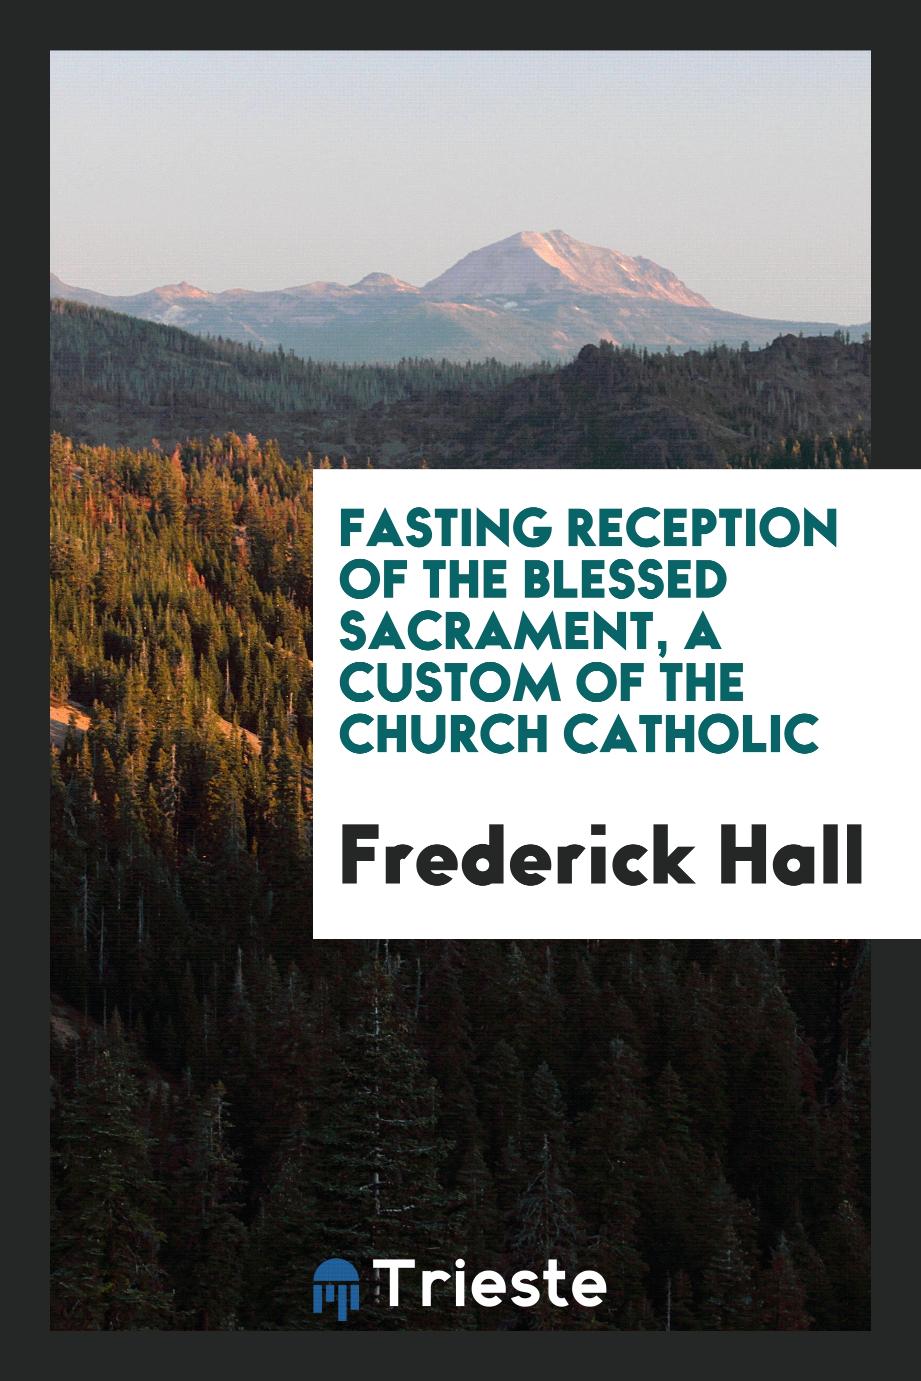 Fasting reception of the blessed sacrament, a custom of the Church catholic